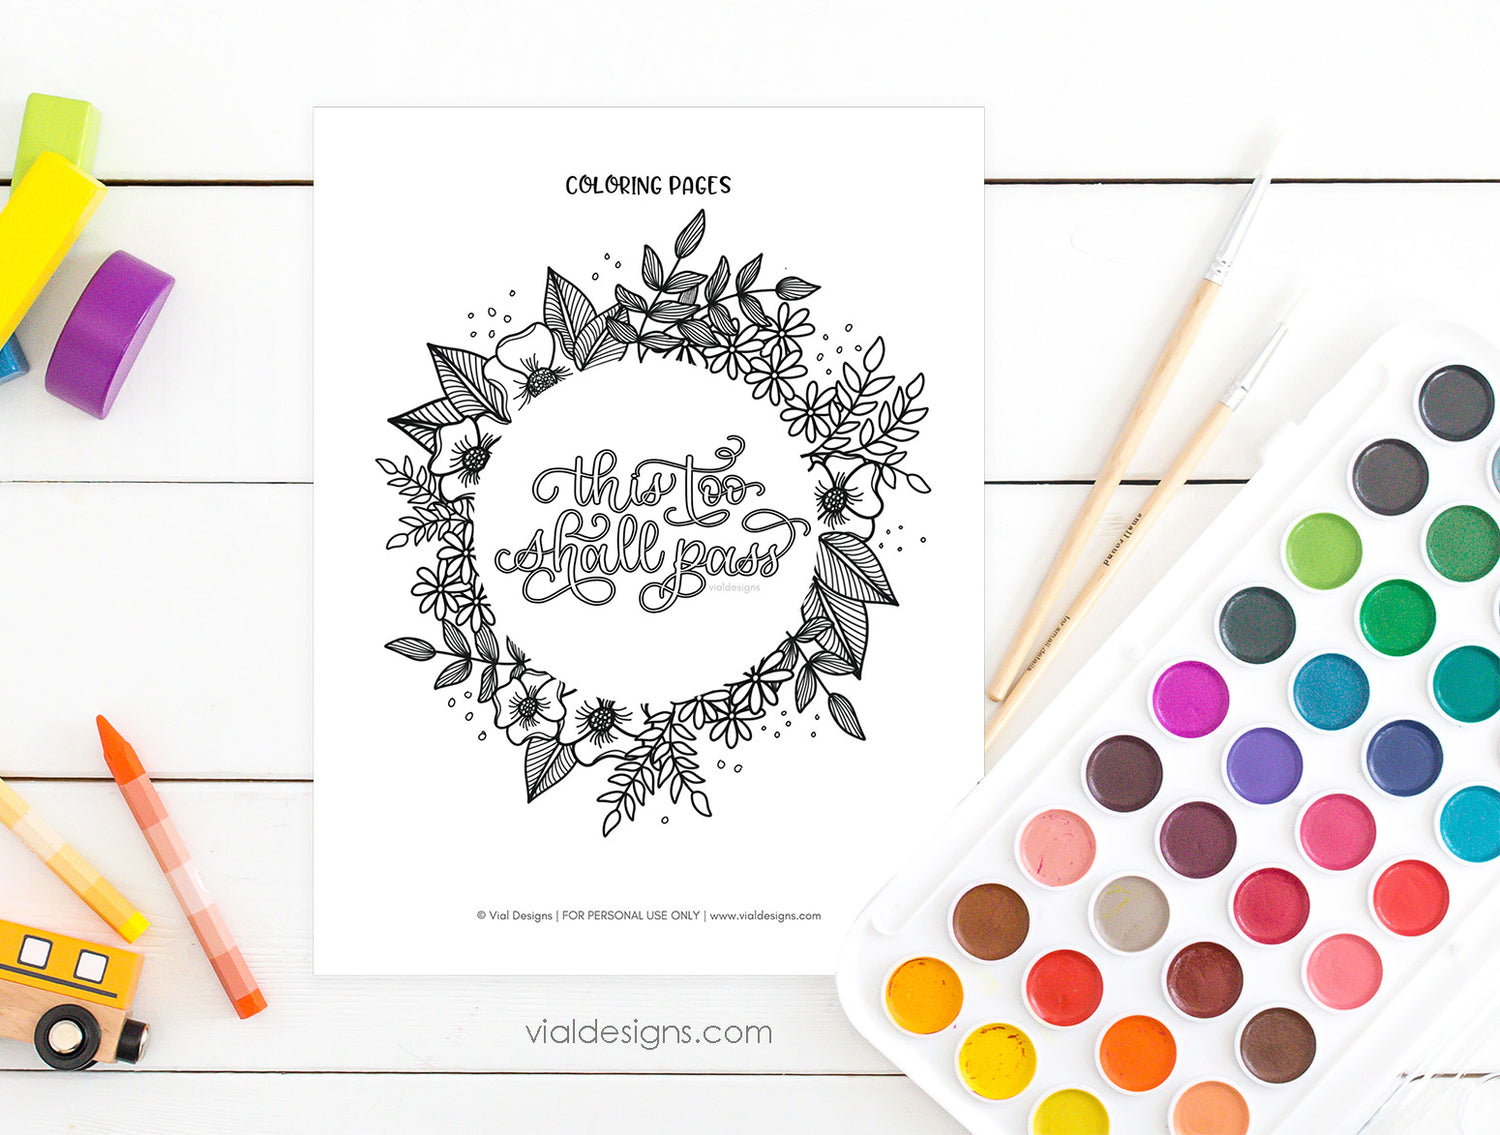 This Too Shall Pass Lettering and Coloring Practice Worksheets | INSTANT DOWNLOAD